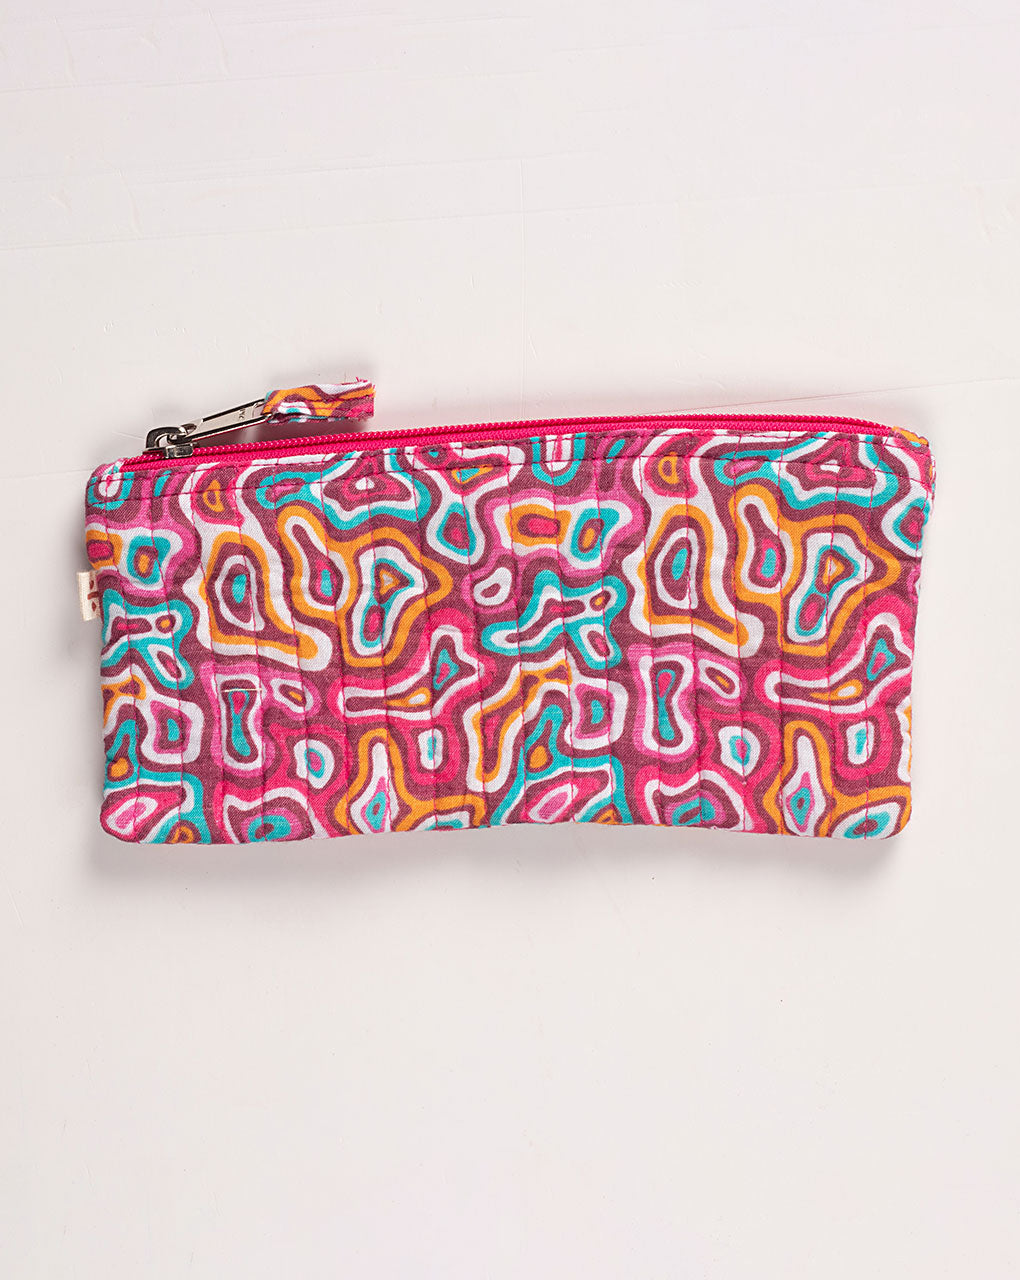 Upcycled Pouch - Fabriclore.com